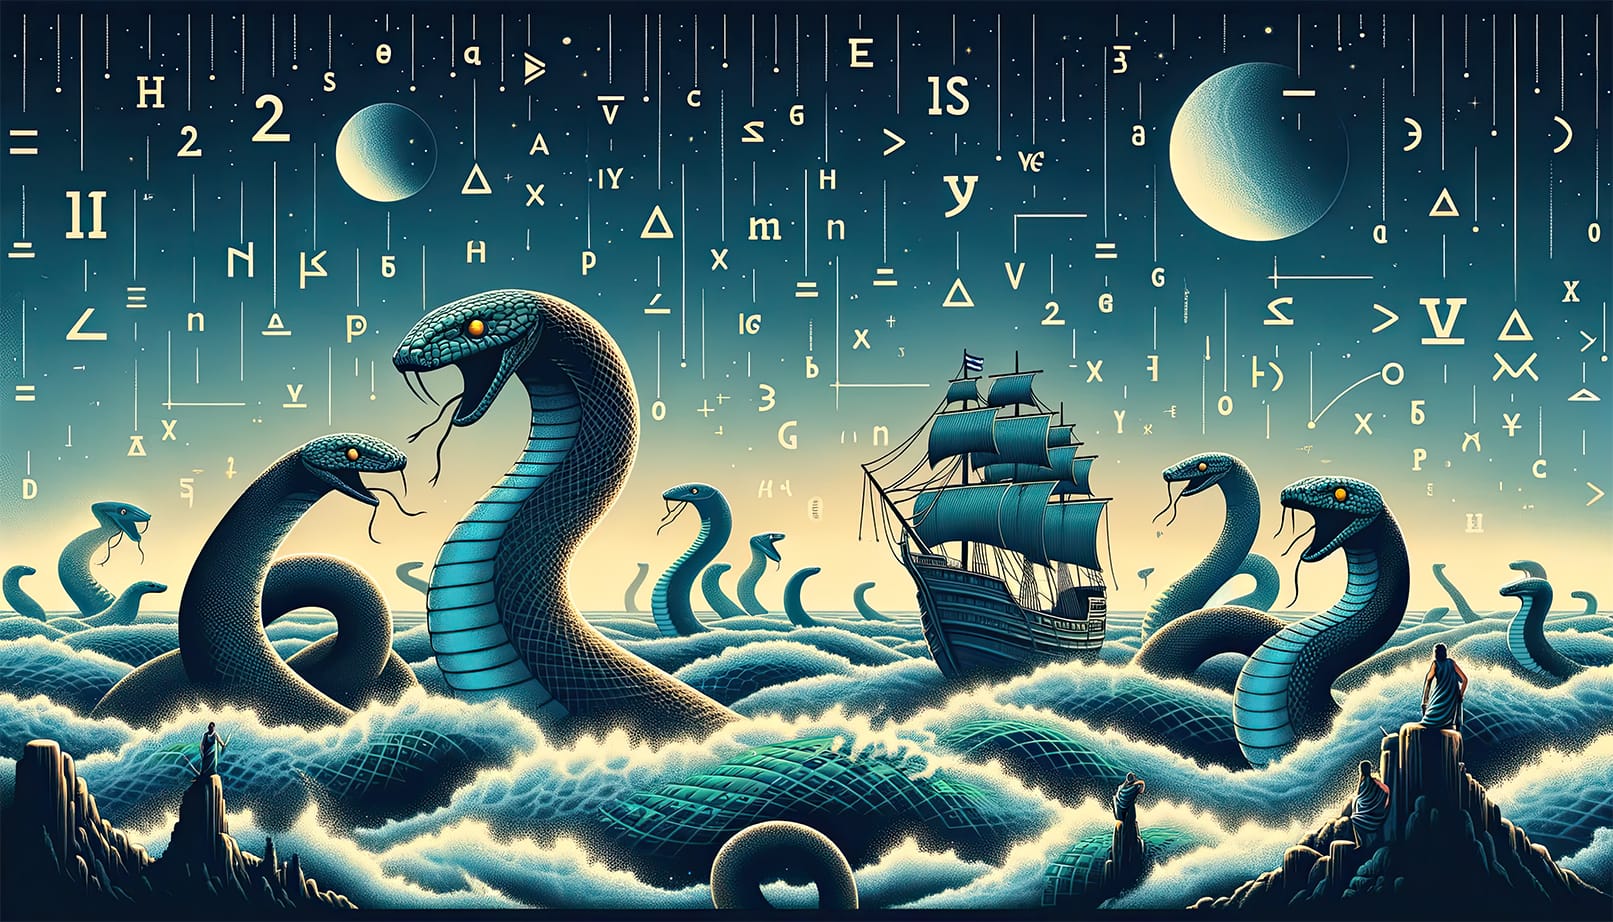 An atmospheric illustration featuring serpentine sea creatures rising from stormy ocean waves amidst mathematical and programming symbols, with an old ship navigating through the chaos, symbolizing the adventure of mastering Python's type variables in the vast sea of coding.